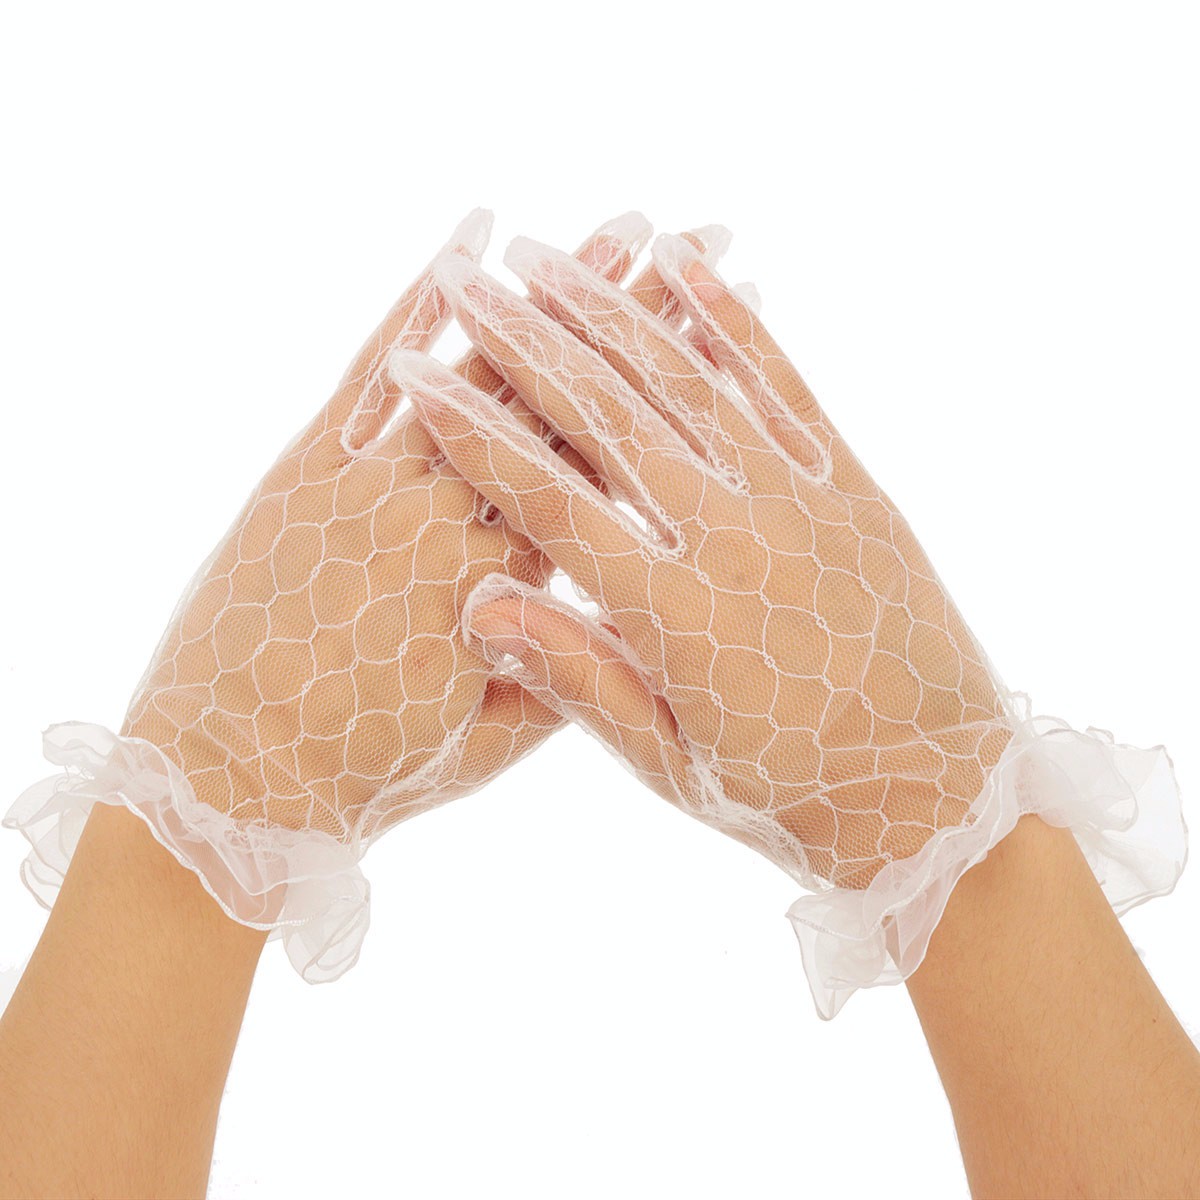 Women-Ladies-Sexy-Finger-Lace-Transparent-Wedding-Bridal-Cocktail-Evening-Prom-Short-Gloves-998605